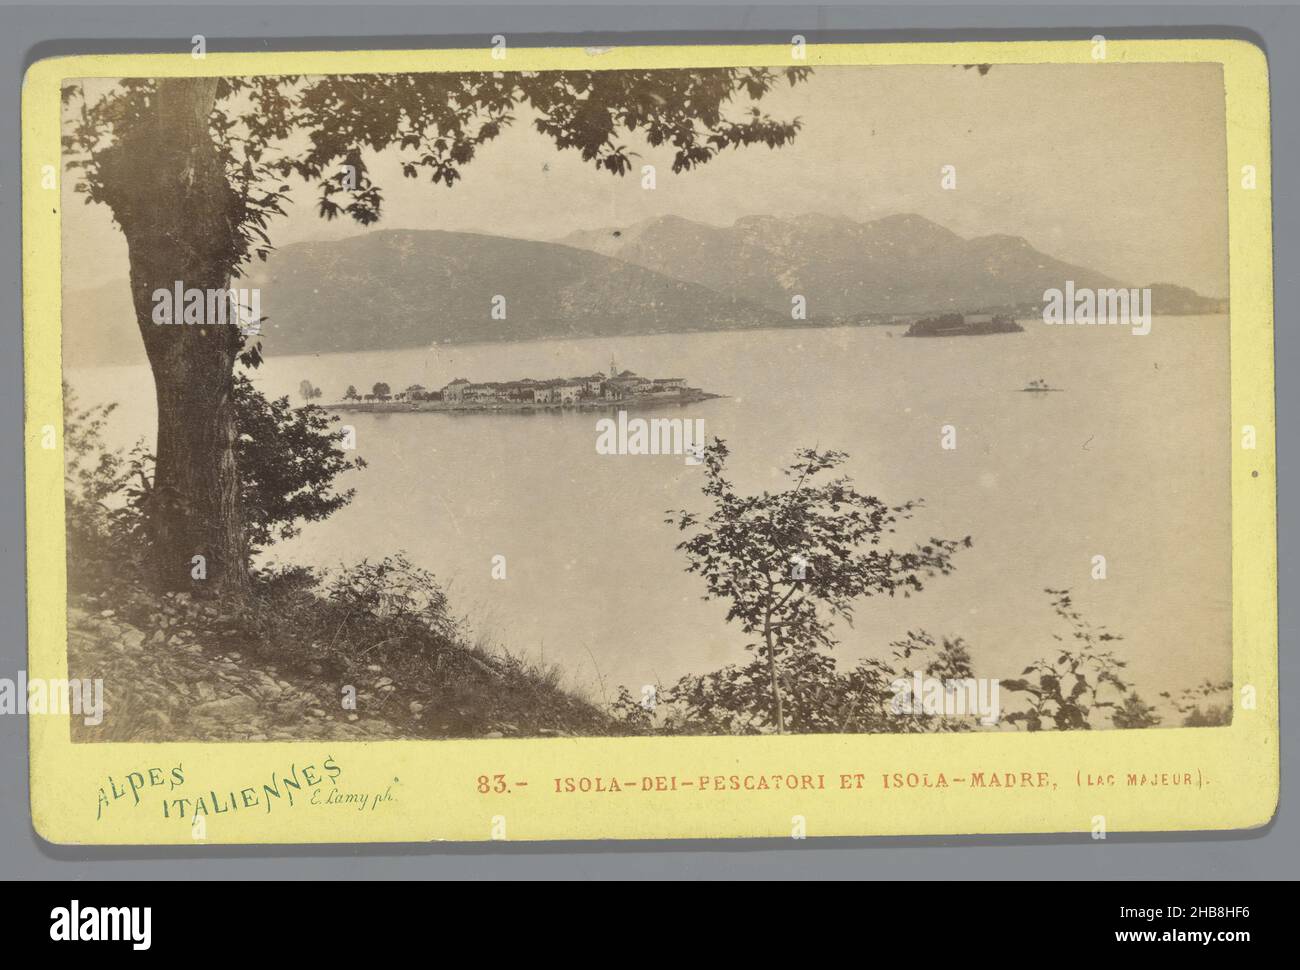 View of Isola dei Pescatori and Isola Madre, Lago Maggiore, Isola-dei-Pescatori et Isola-Madre, (Lac Majeur) (title on object), Alpes Italiennes (series title on object), Ernest Eléonor Pierre Lamy (mentioned on object), Lago Maggiore, 1861 - 1878, paper, cardboard, albumen print, height 67 mm × width 106 mm Stock Photo